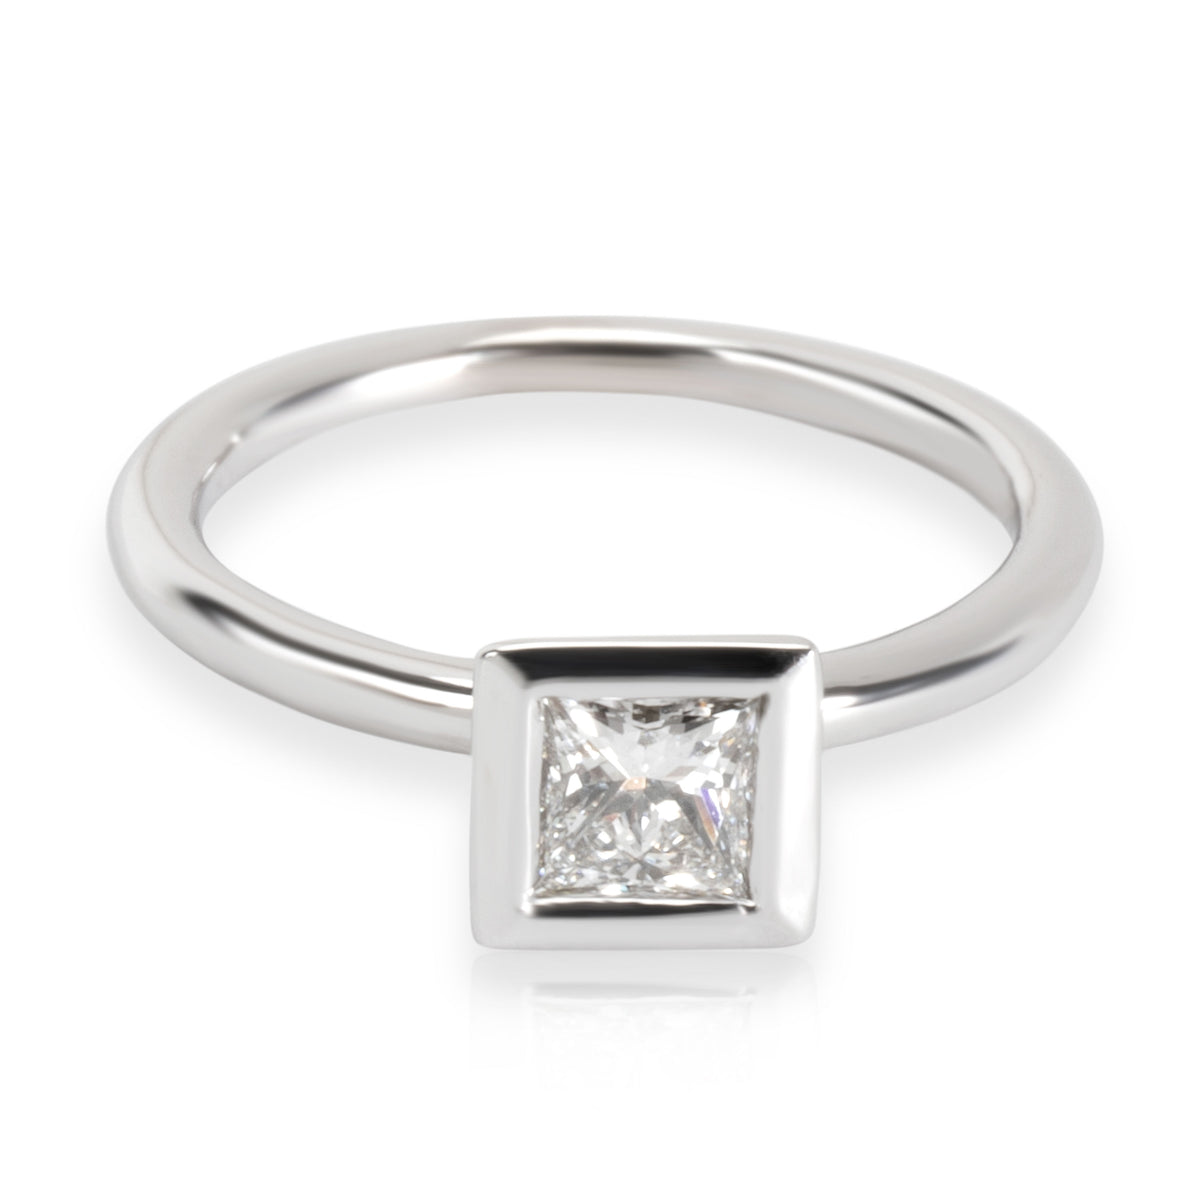 GIA Certified Princess Cut Diamond Stackable Ring in 14K White Gold